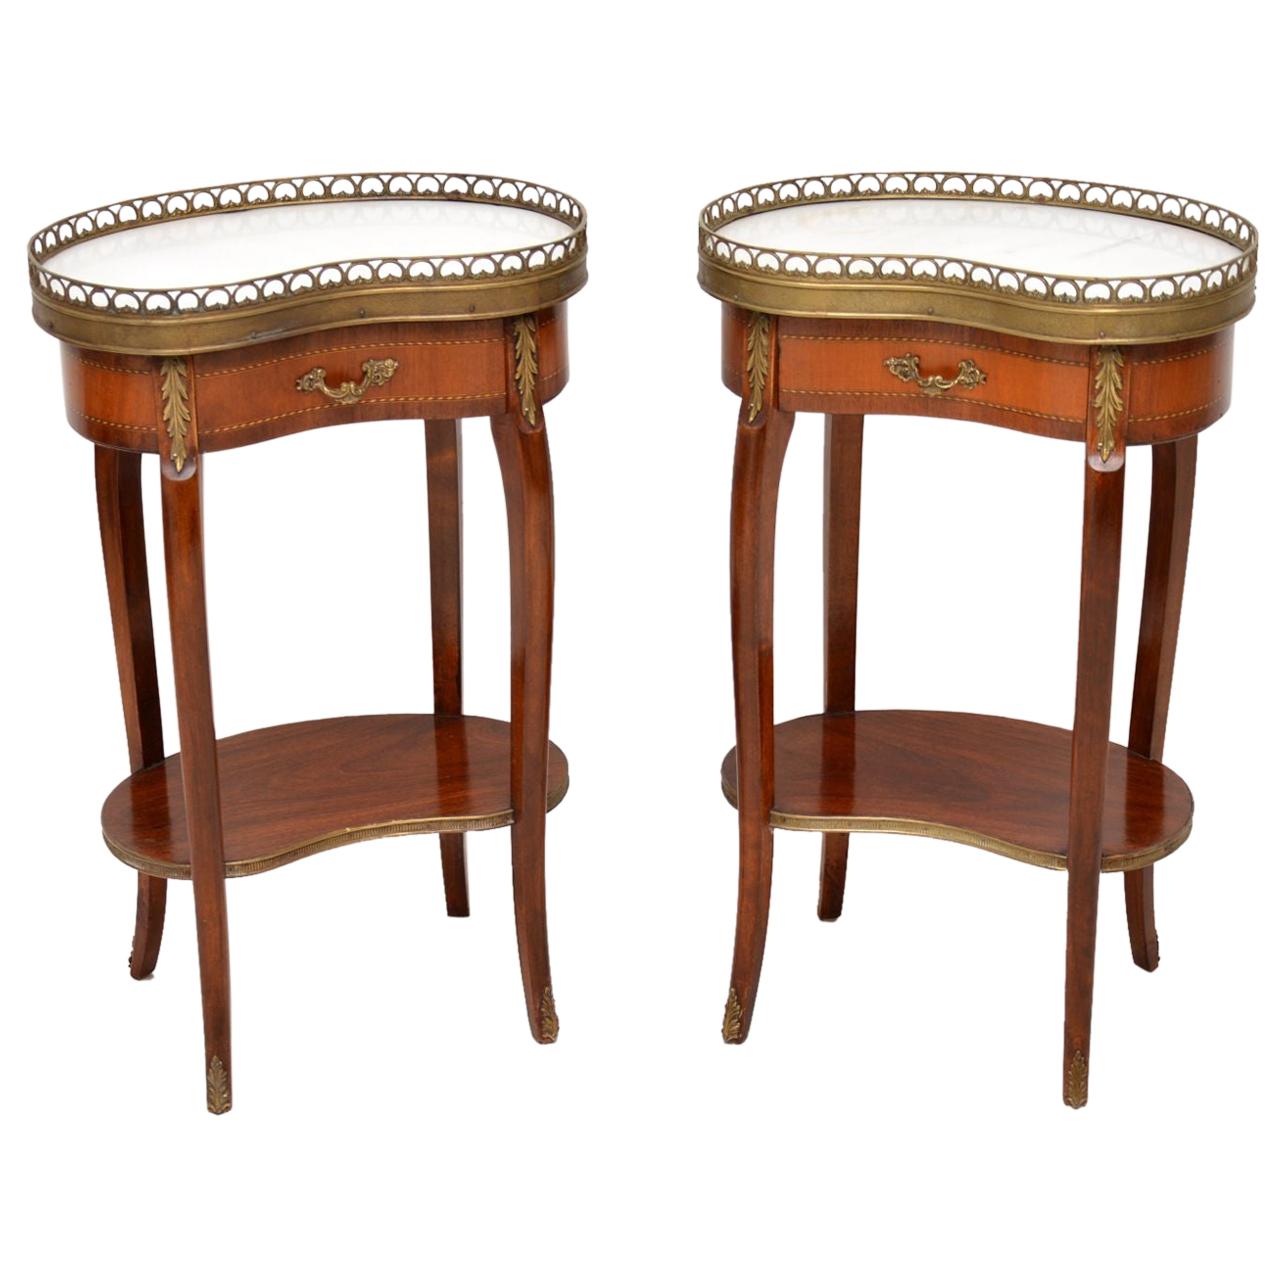 Pair of Antique French Marble-Top Kidney Side Tables